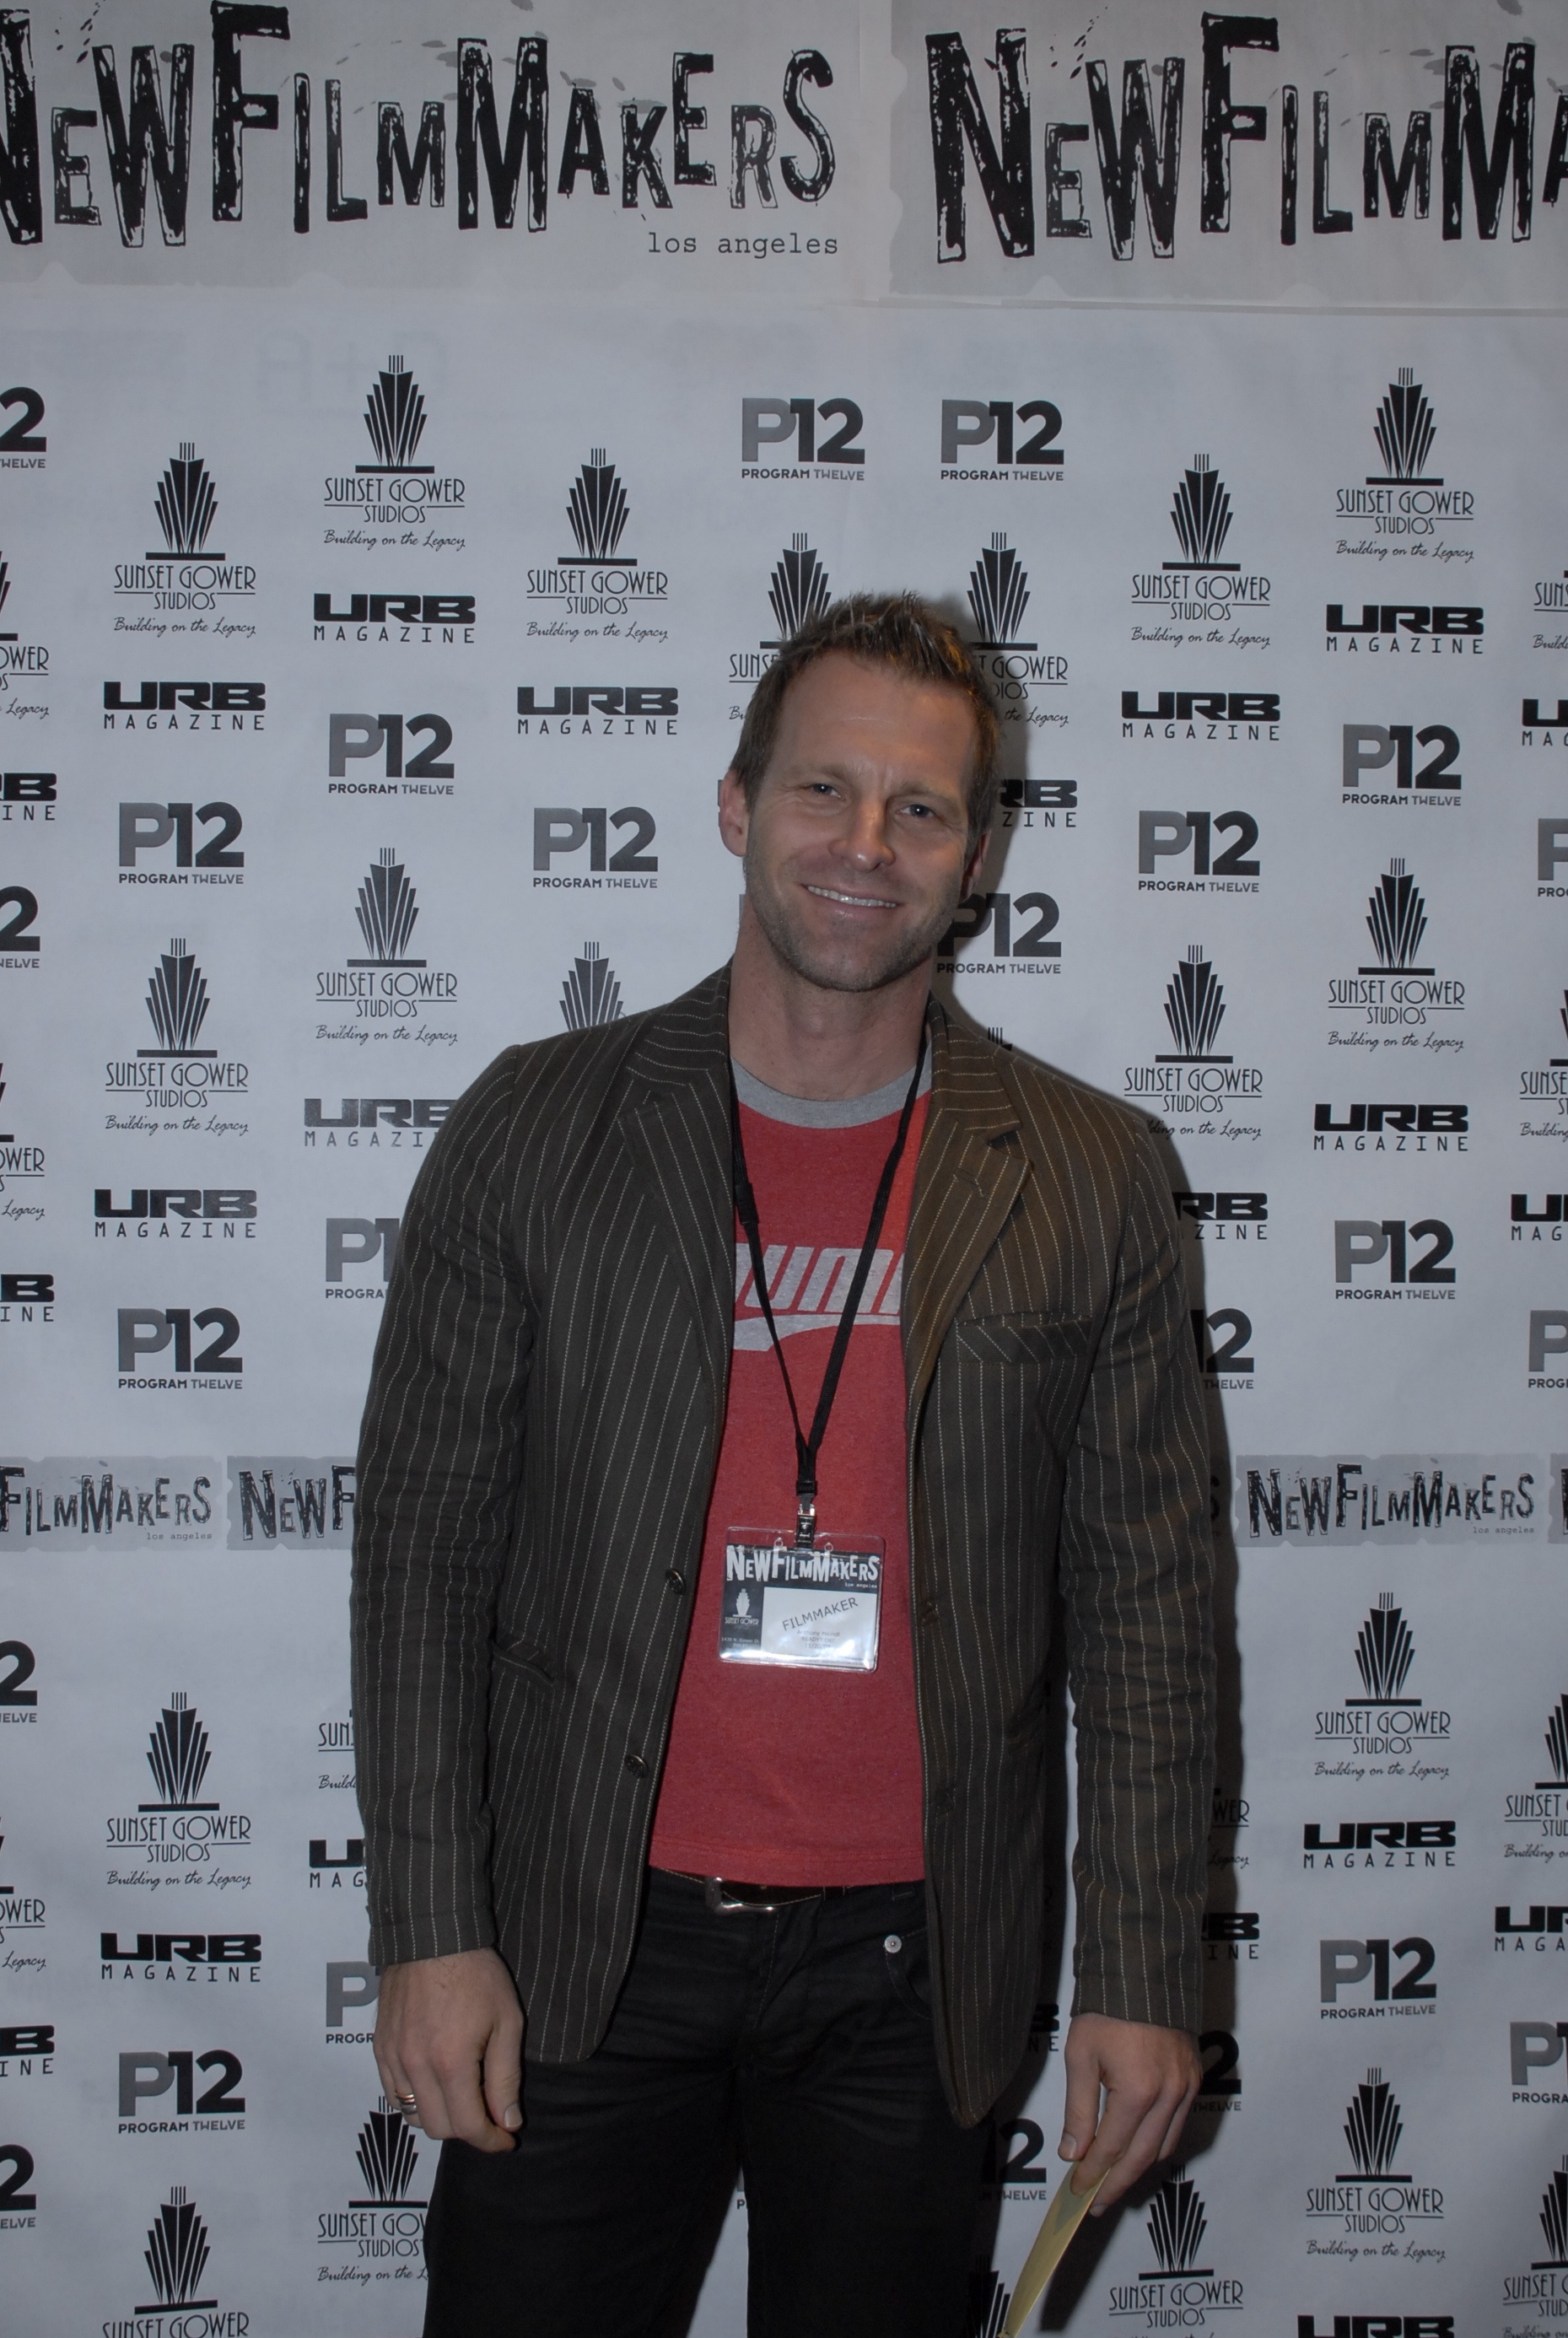 Photo date: 25 November 2008 - Anthony Meindl at NewFilmmakers LA at Sunset Gower Studios